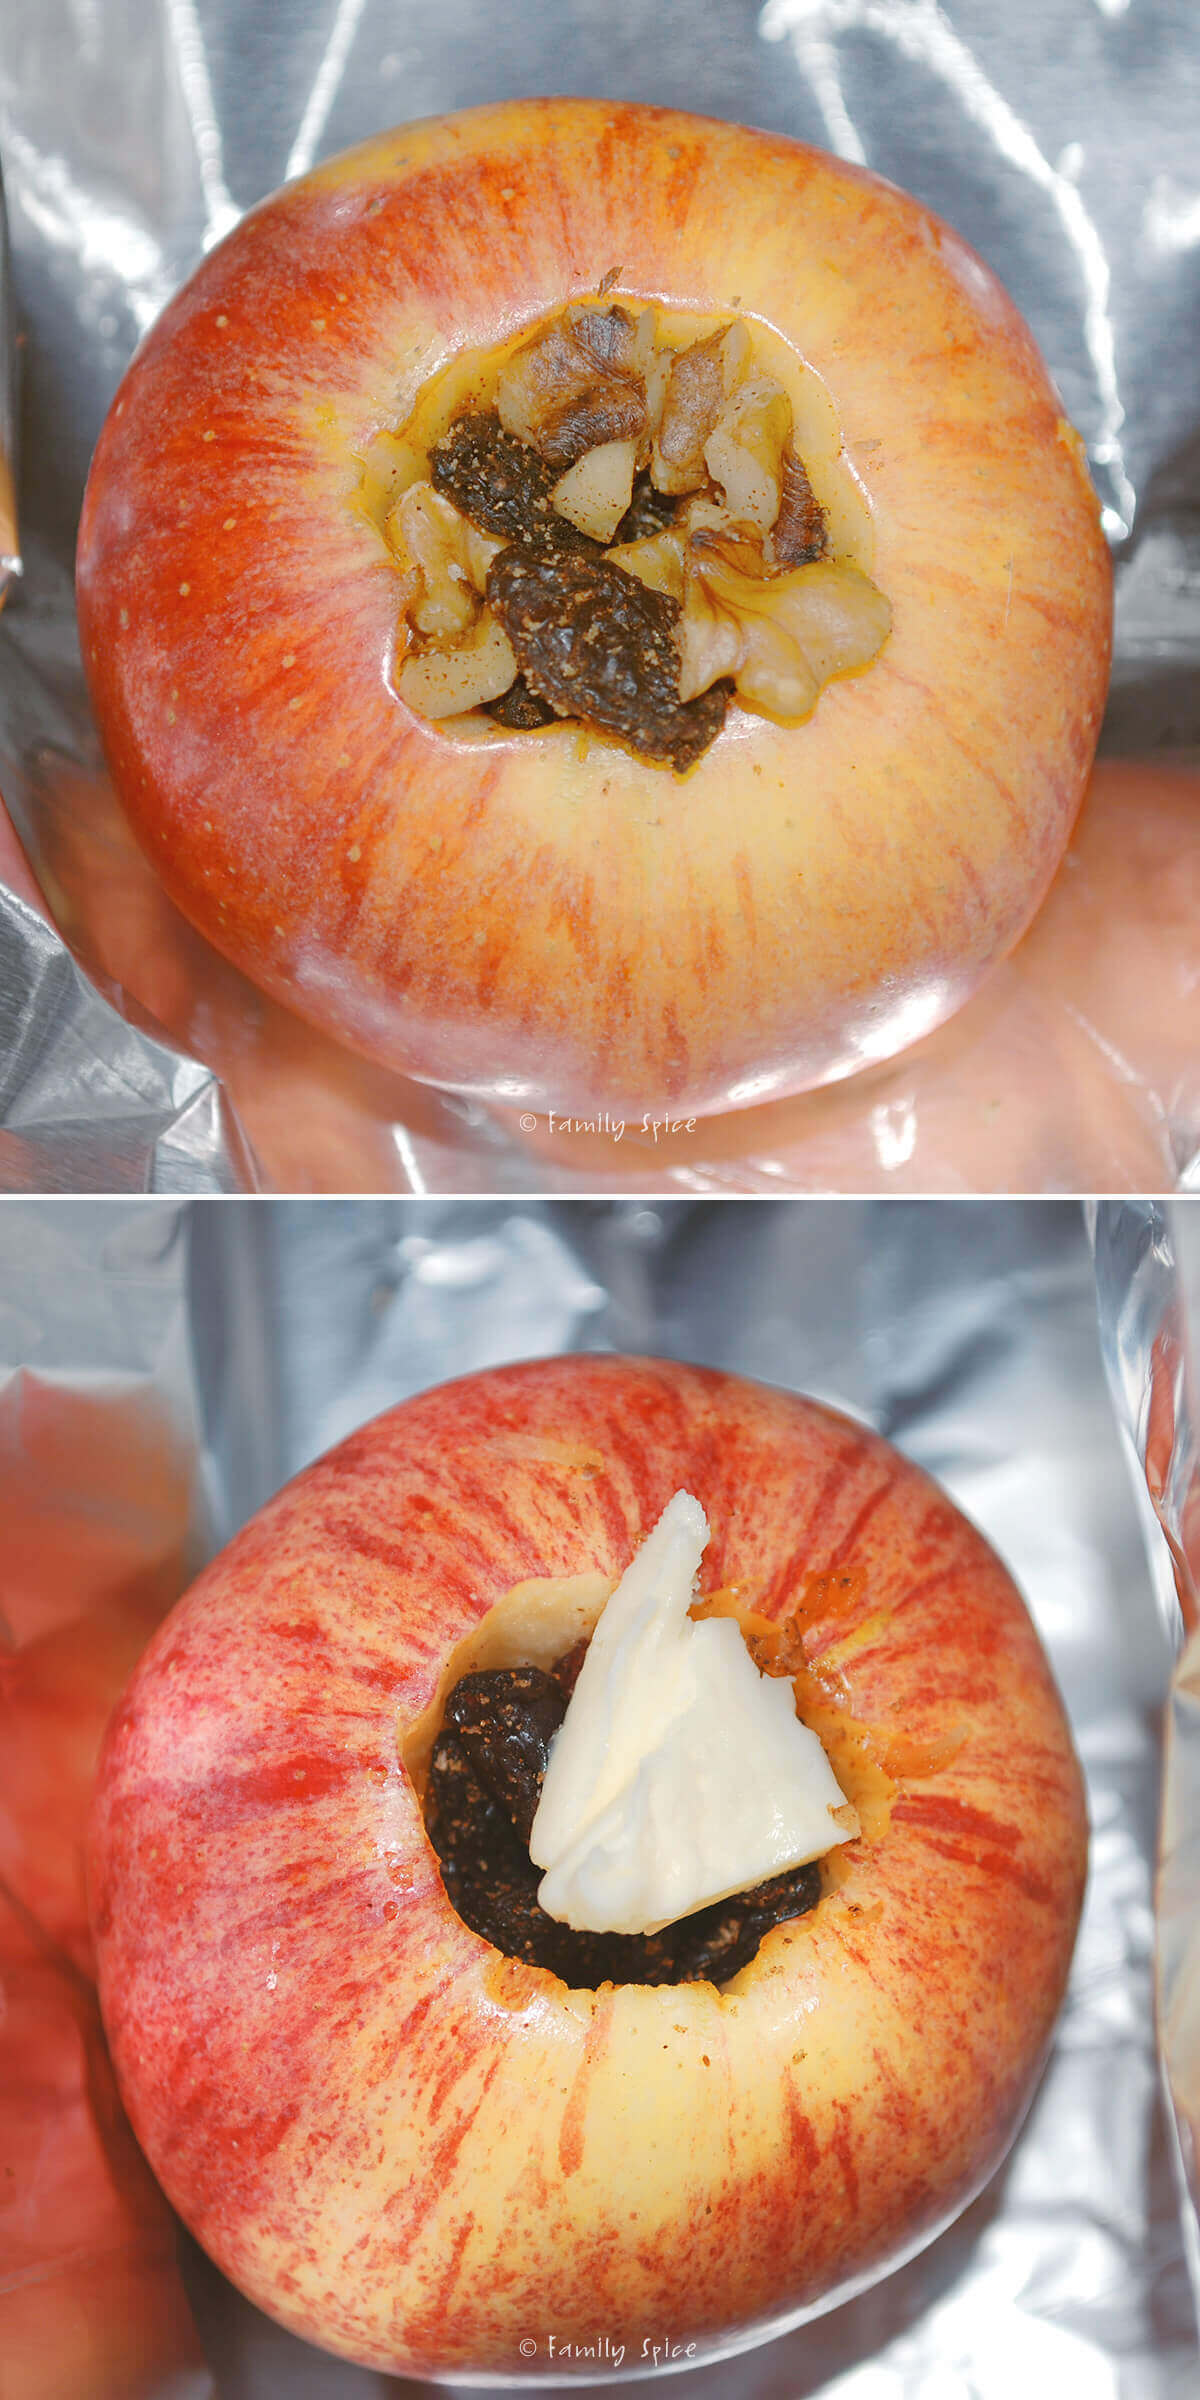 Apples cored out stuffed with nuts and raisins